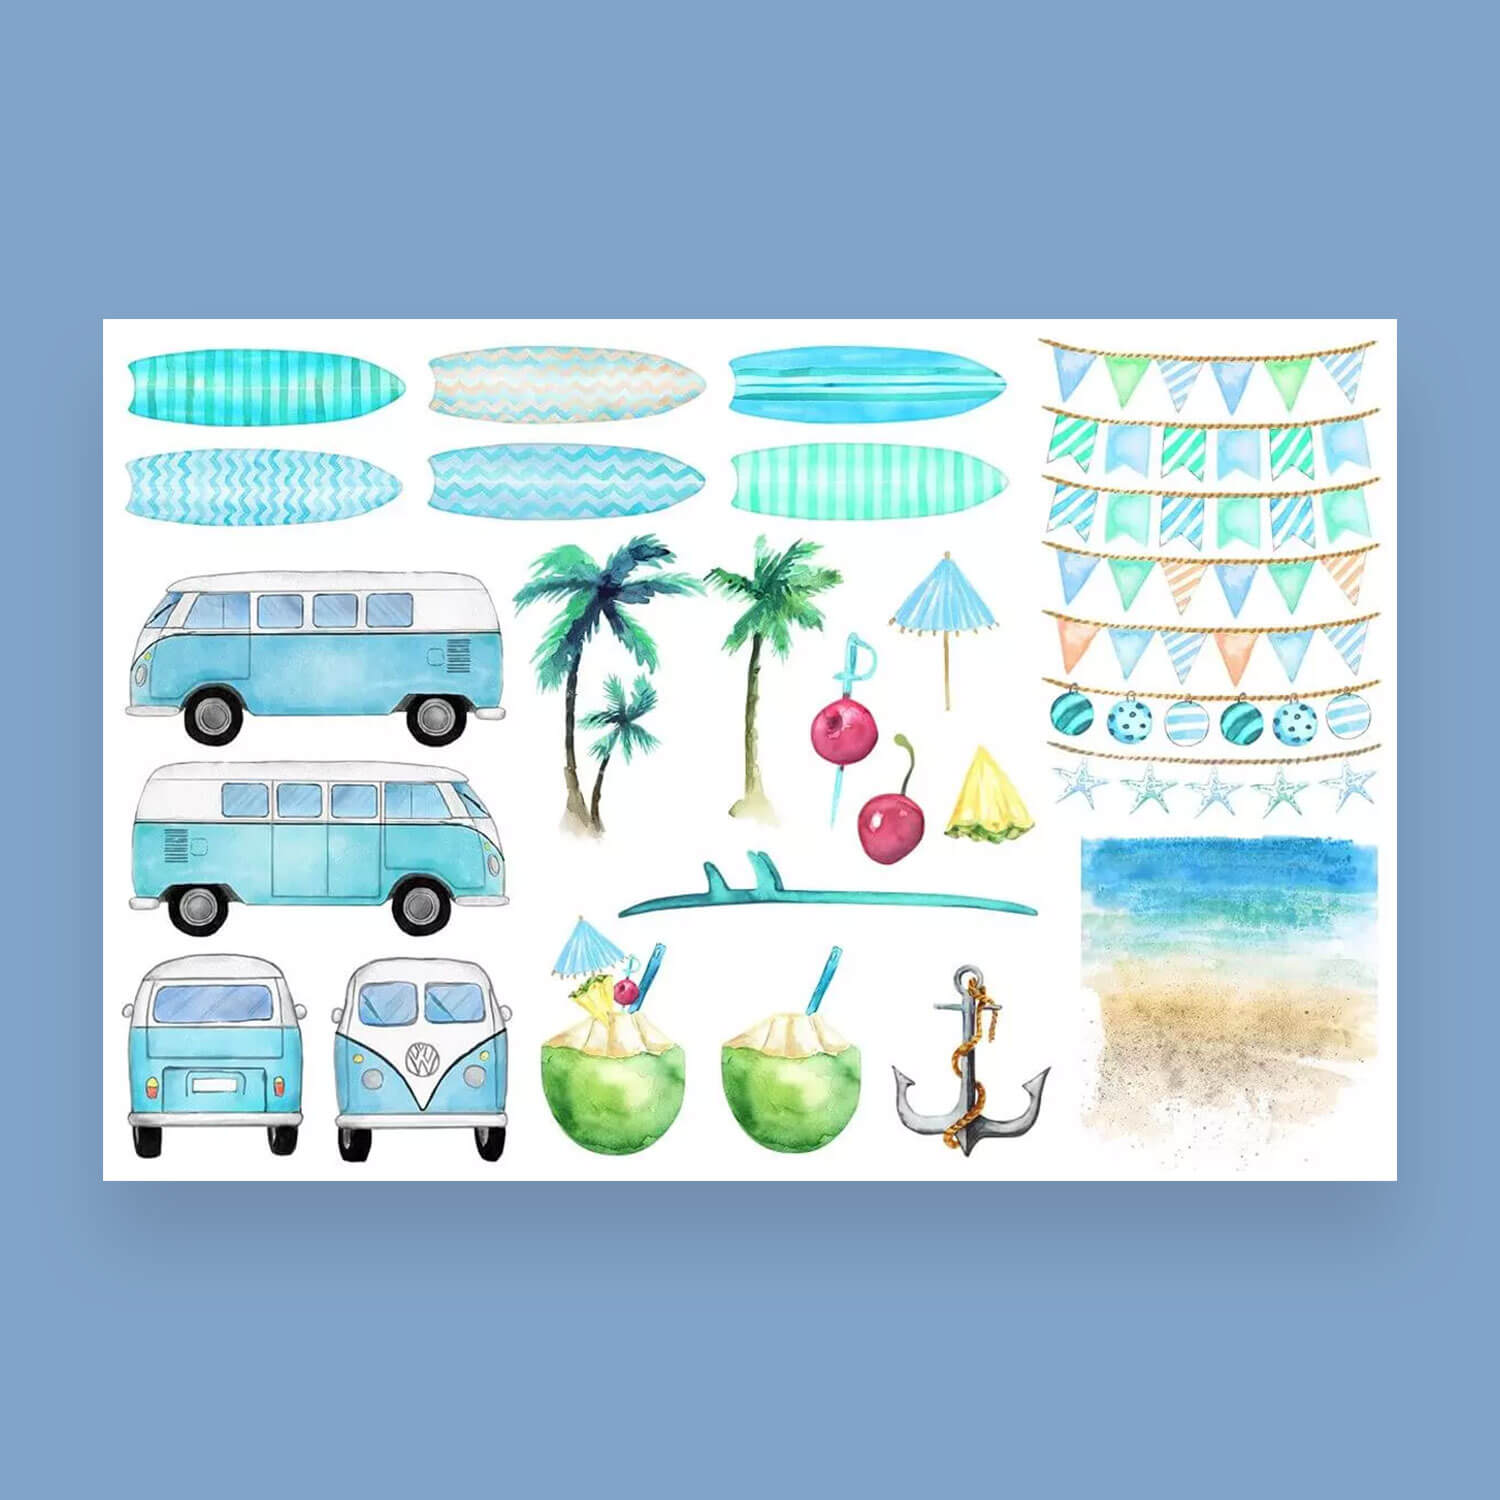 Blue vw bus clipart set: surfboards, palm trees, berries on a skewer, cocktails in coconuts, anchor, flags.